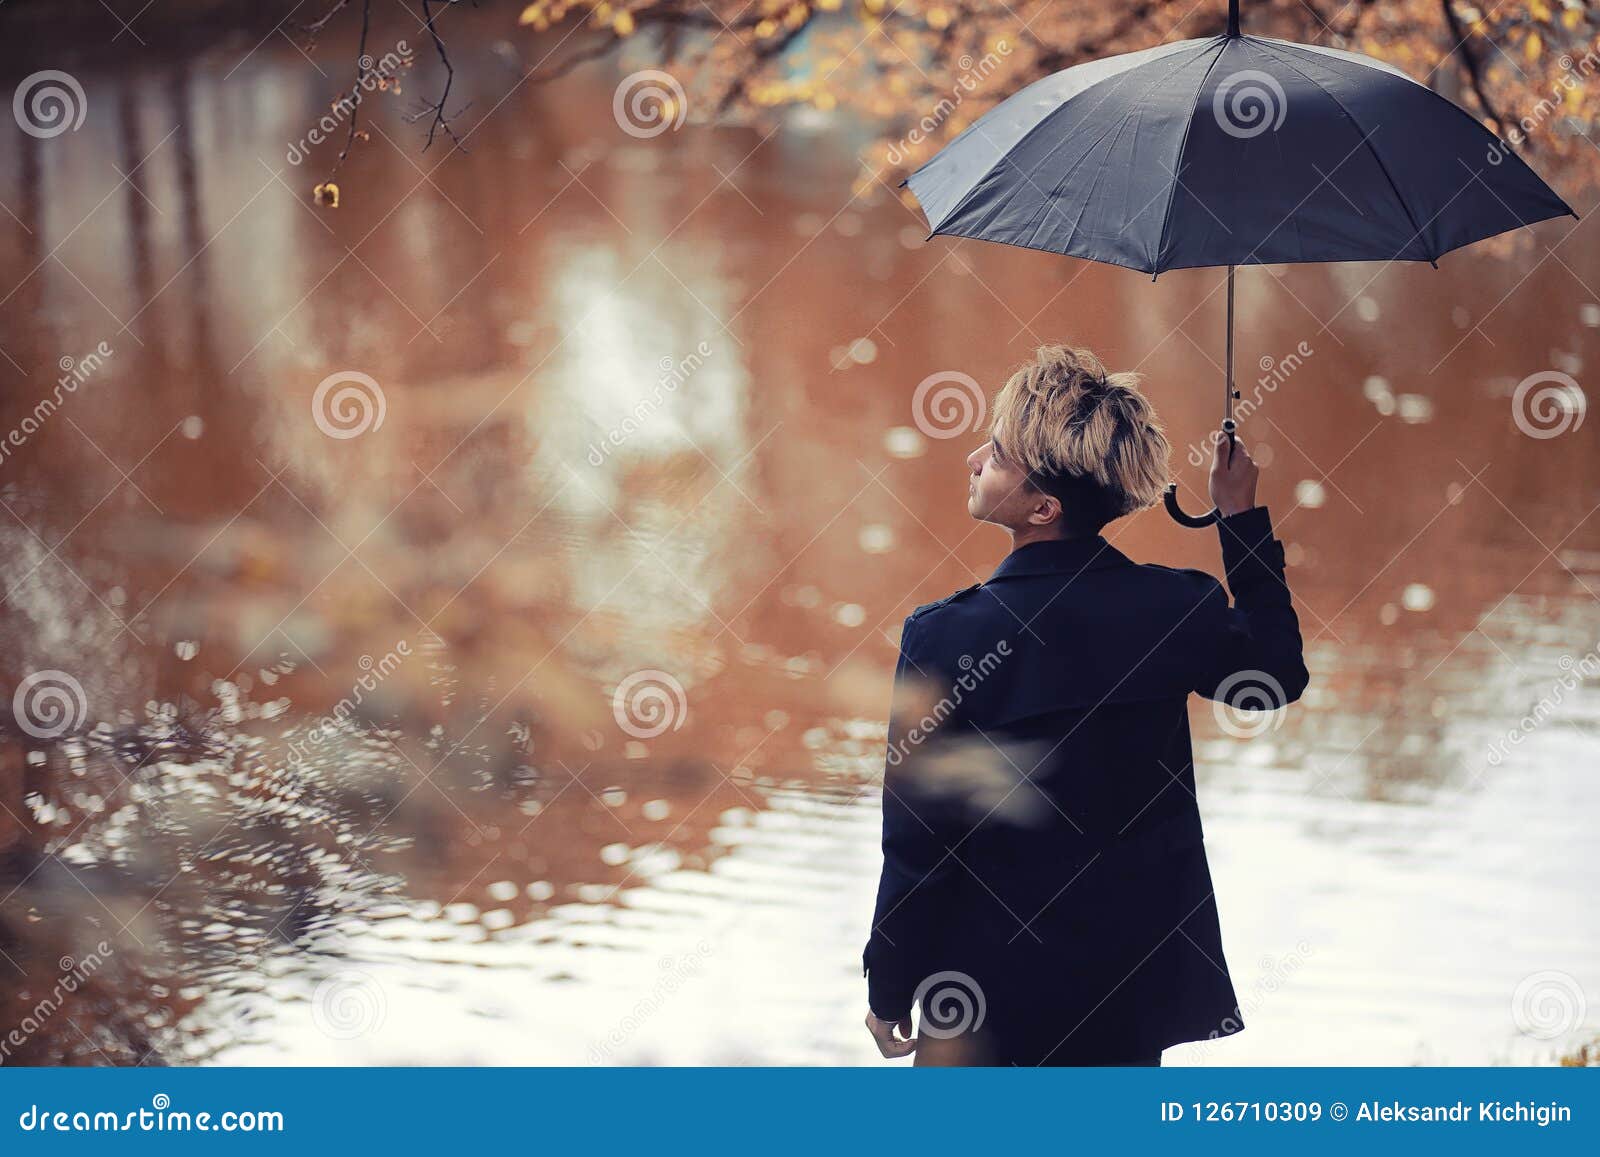 autumn rainy weather and a young man with an umbrella